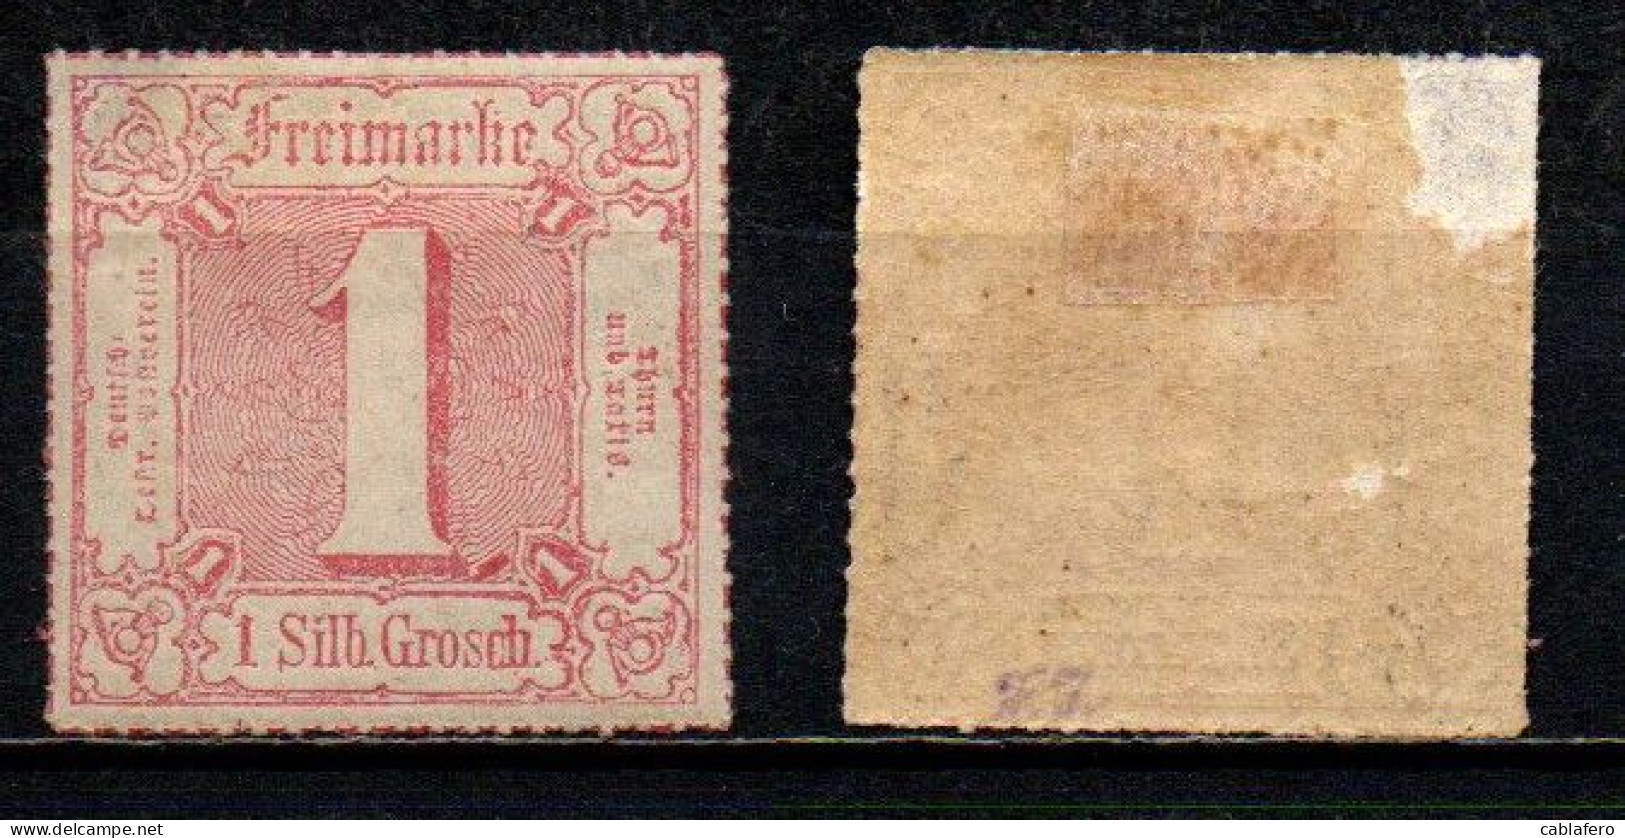 THURN UND TAXIS - 1862 - CIFRA - 1 S. - MH - Mint